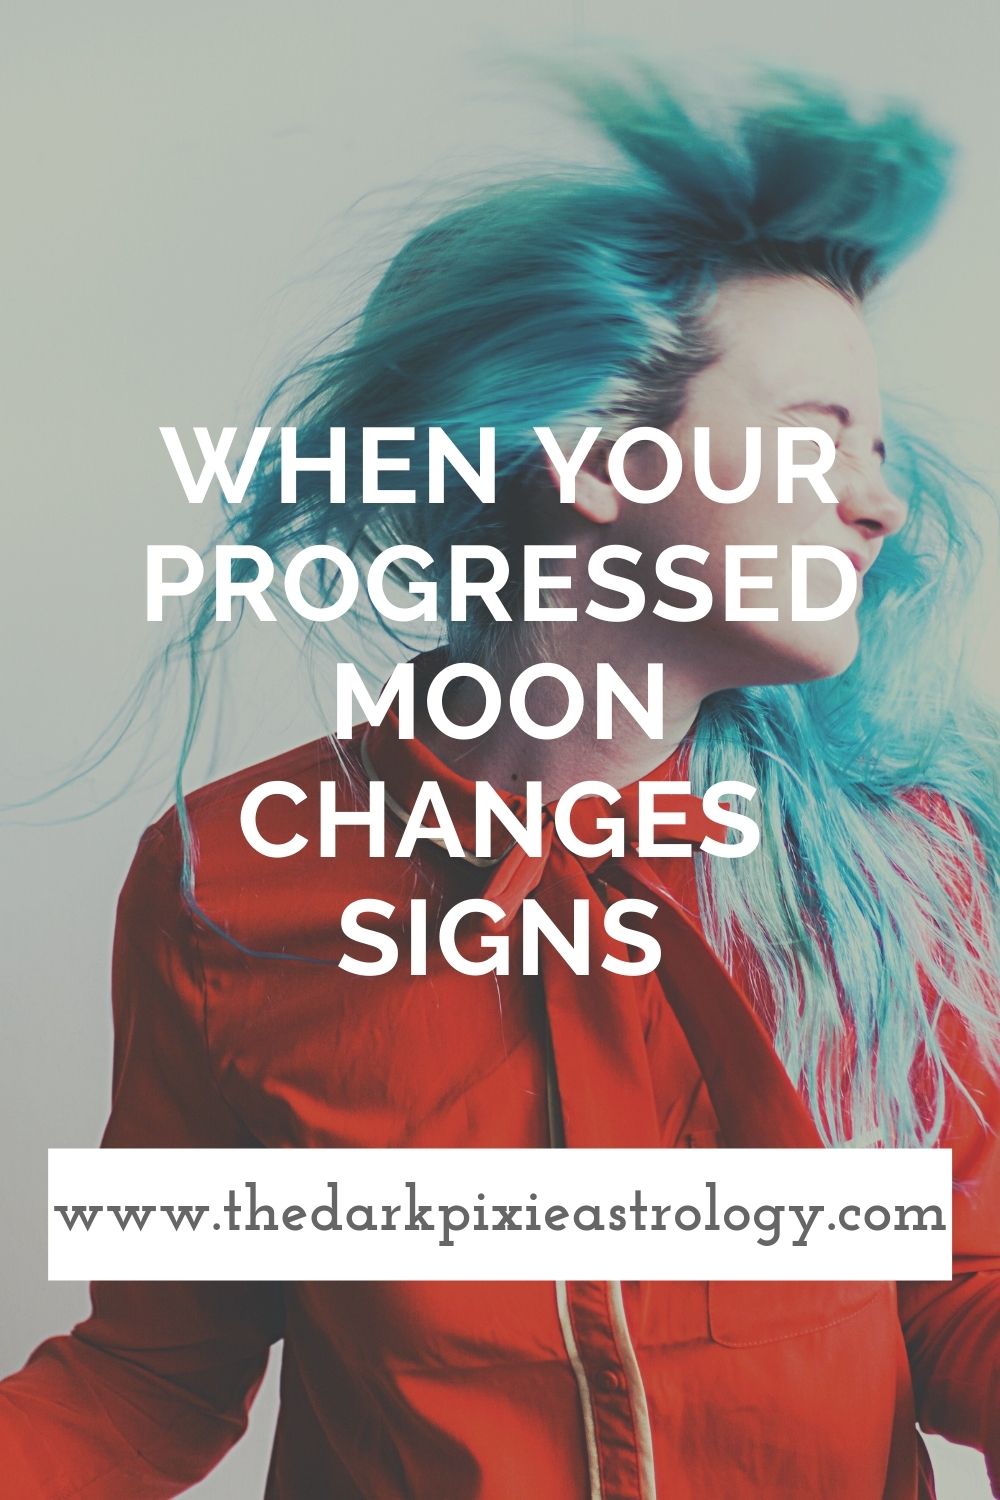 When Your Progressed Moon Changes Signs - The Dark Pixie Astrology